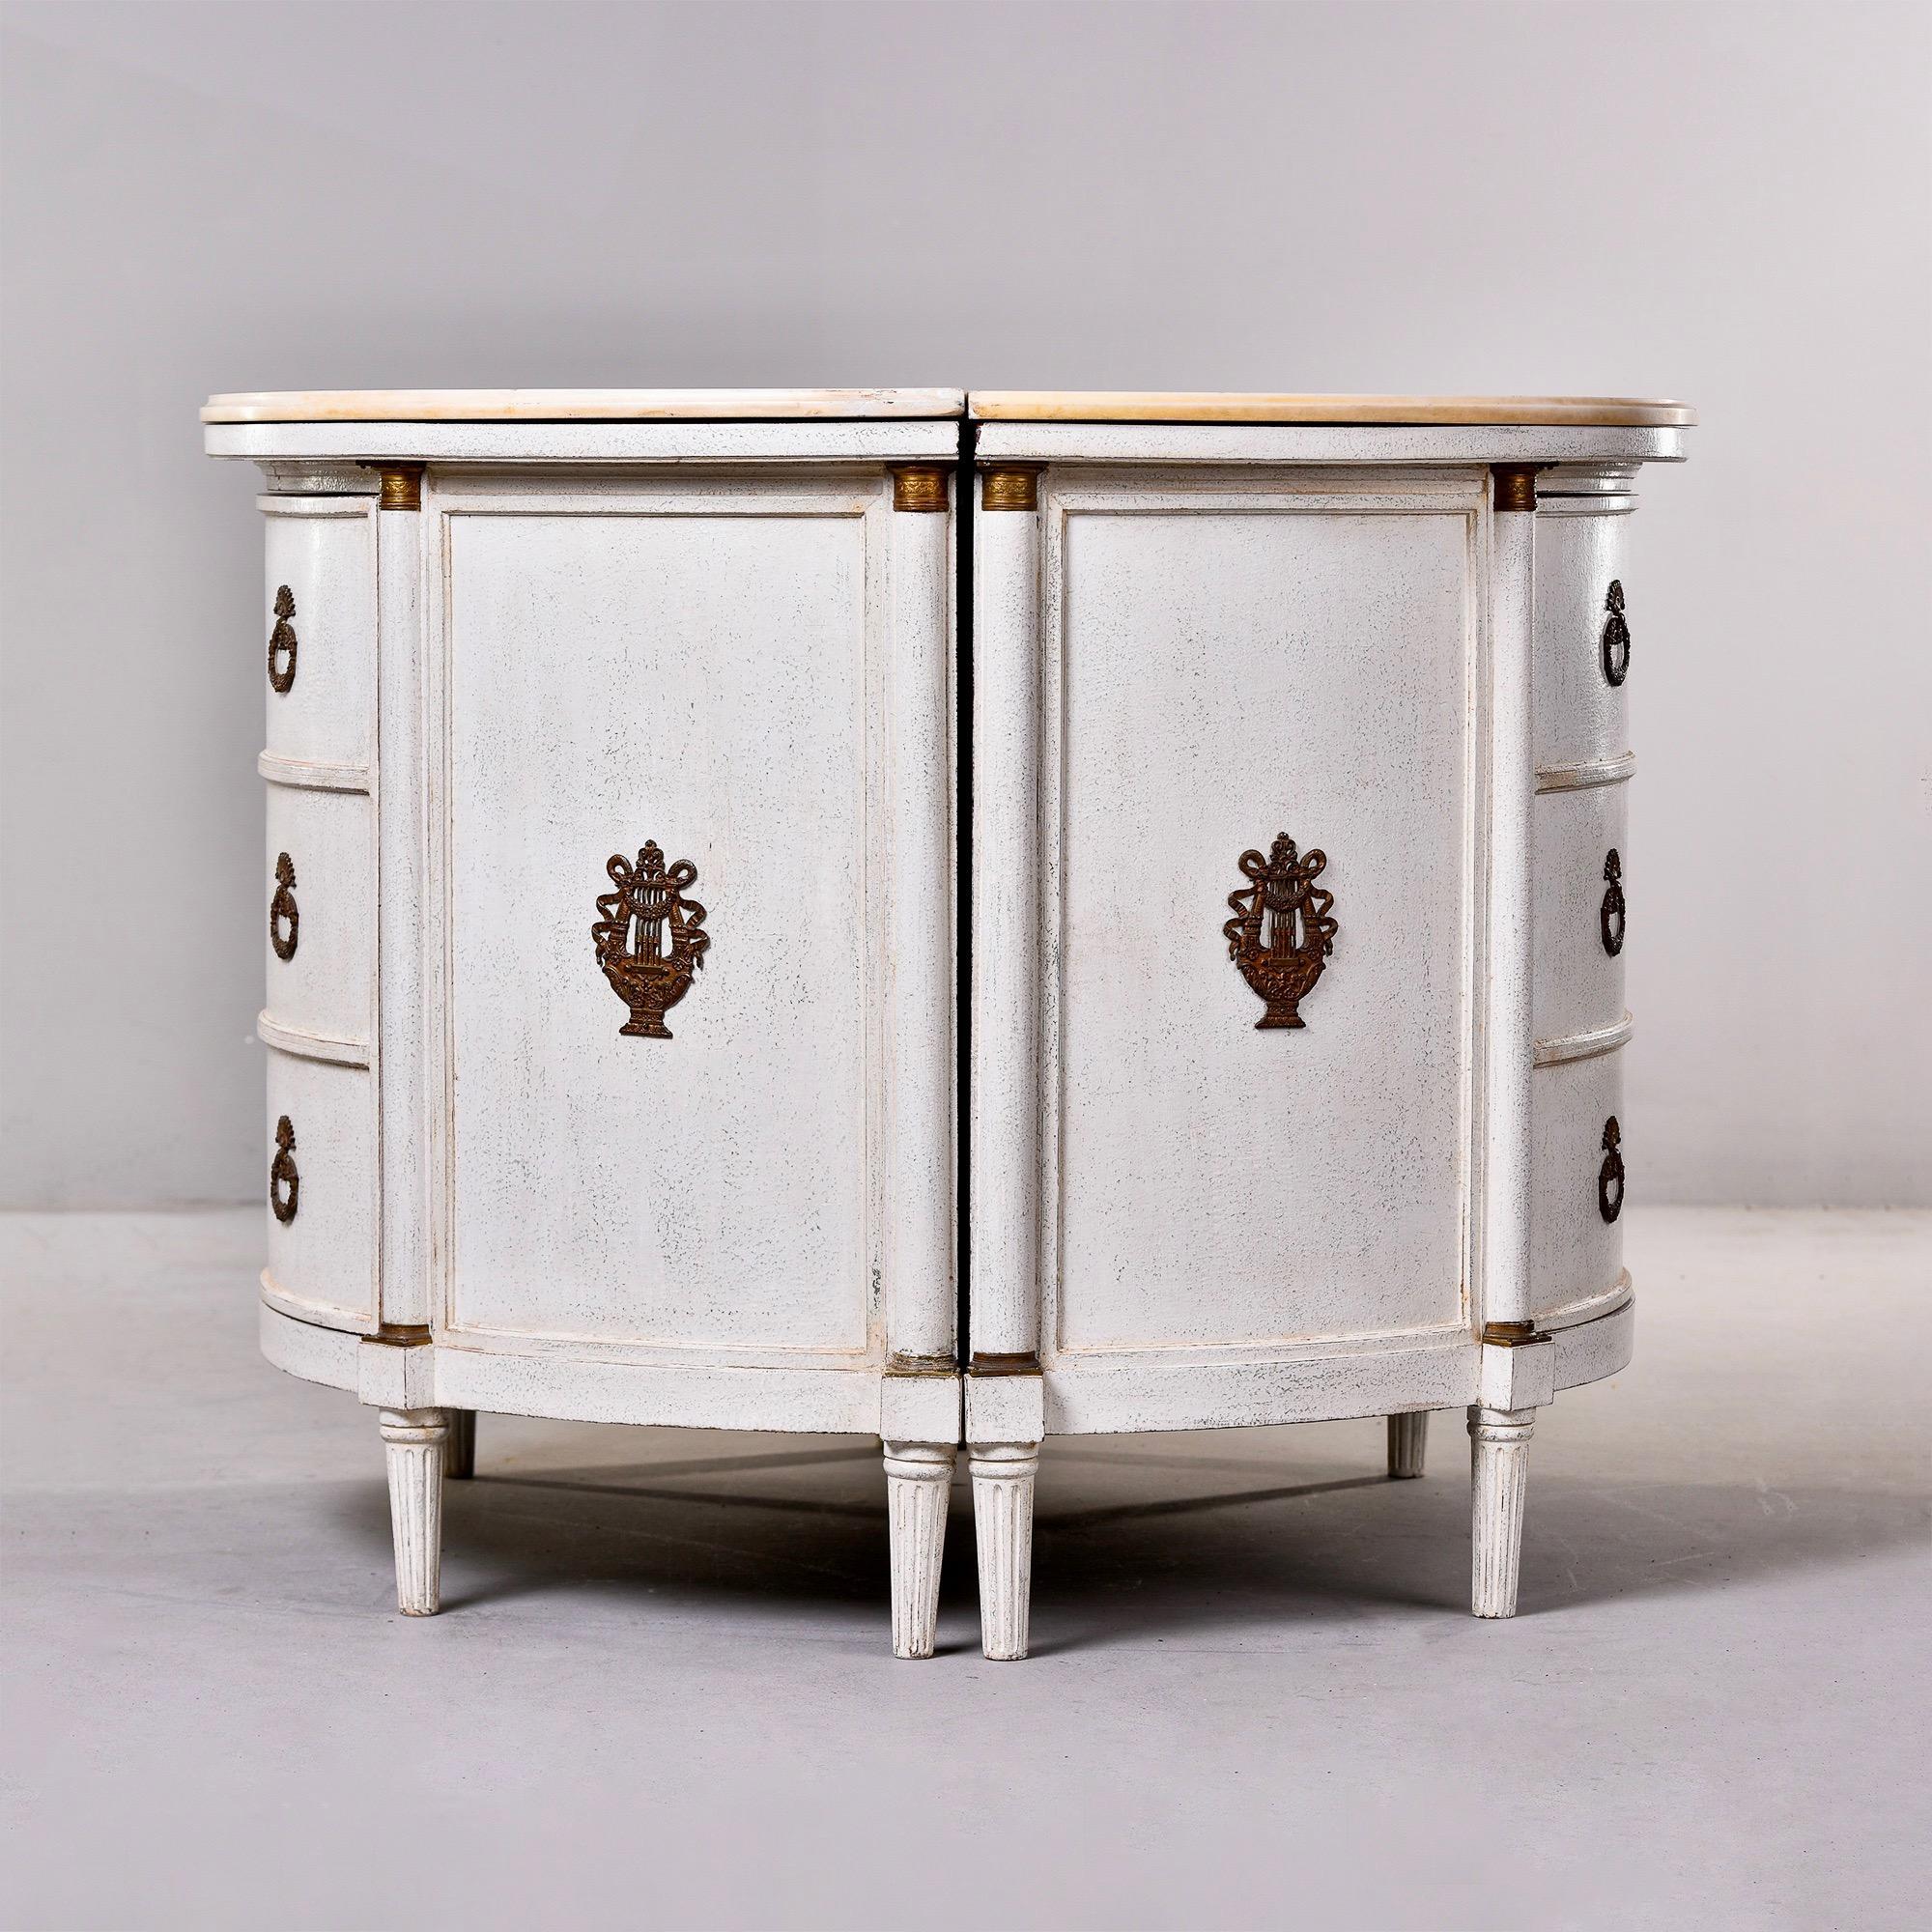 20th Century Pair of Pine Regency Style Demilune Cabinets with White Marble Tops